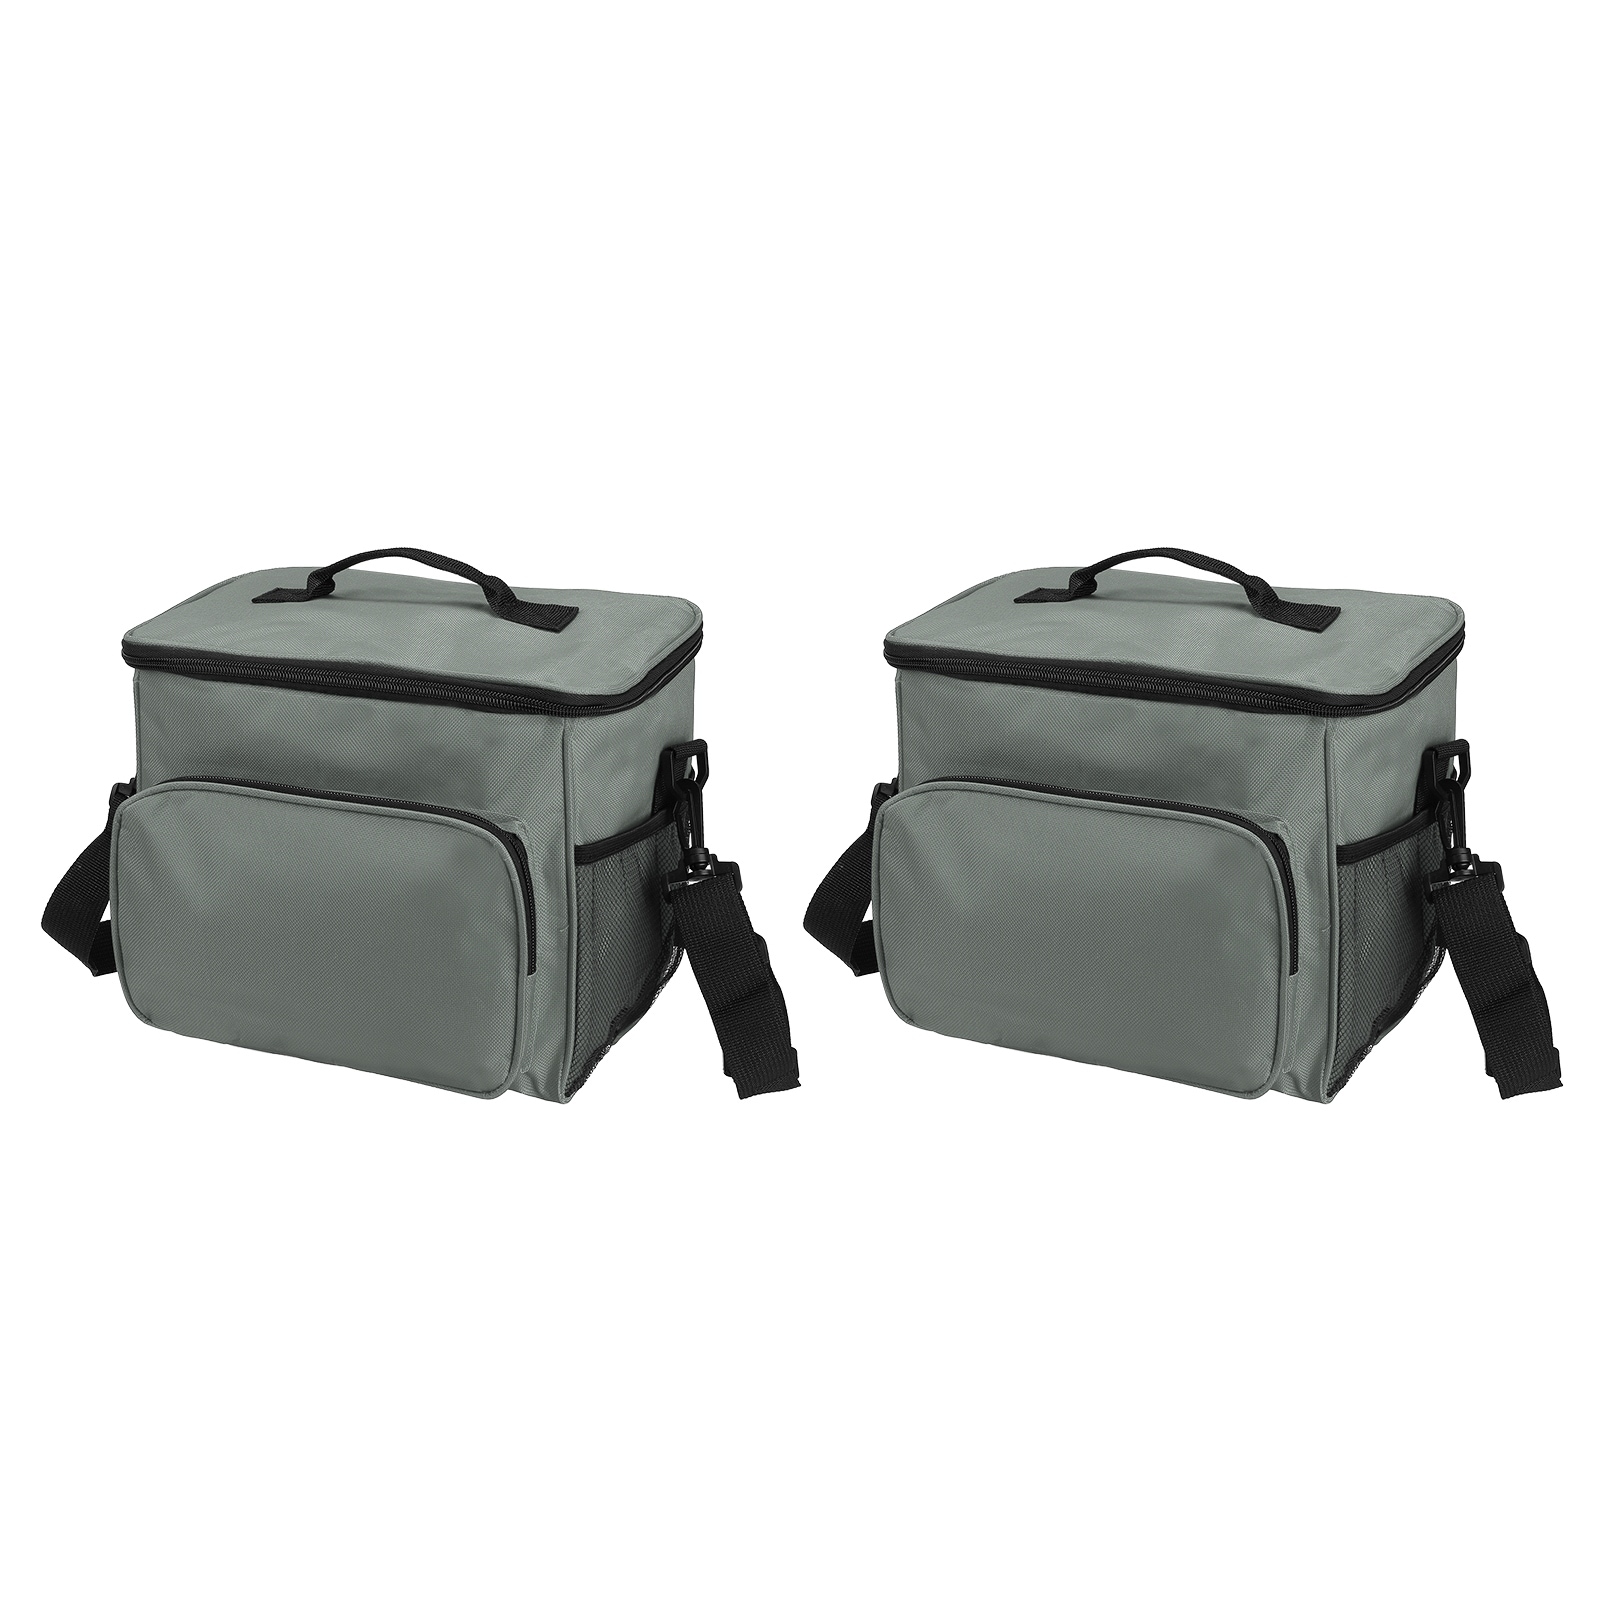 2 Pcs Lunch Box for Women/Men, Insulated Lunch Bag, 9.4x6.7x10.2 Inch